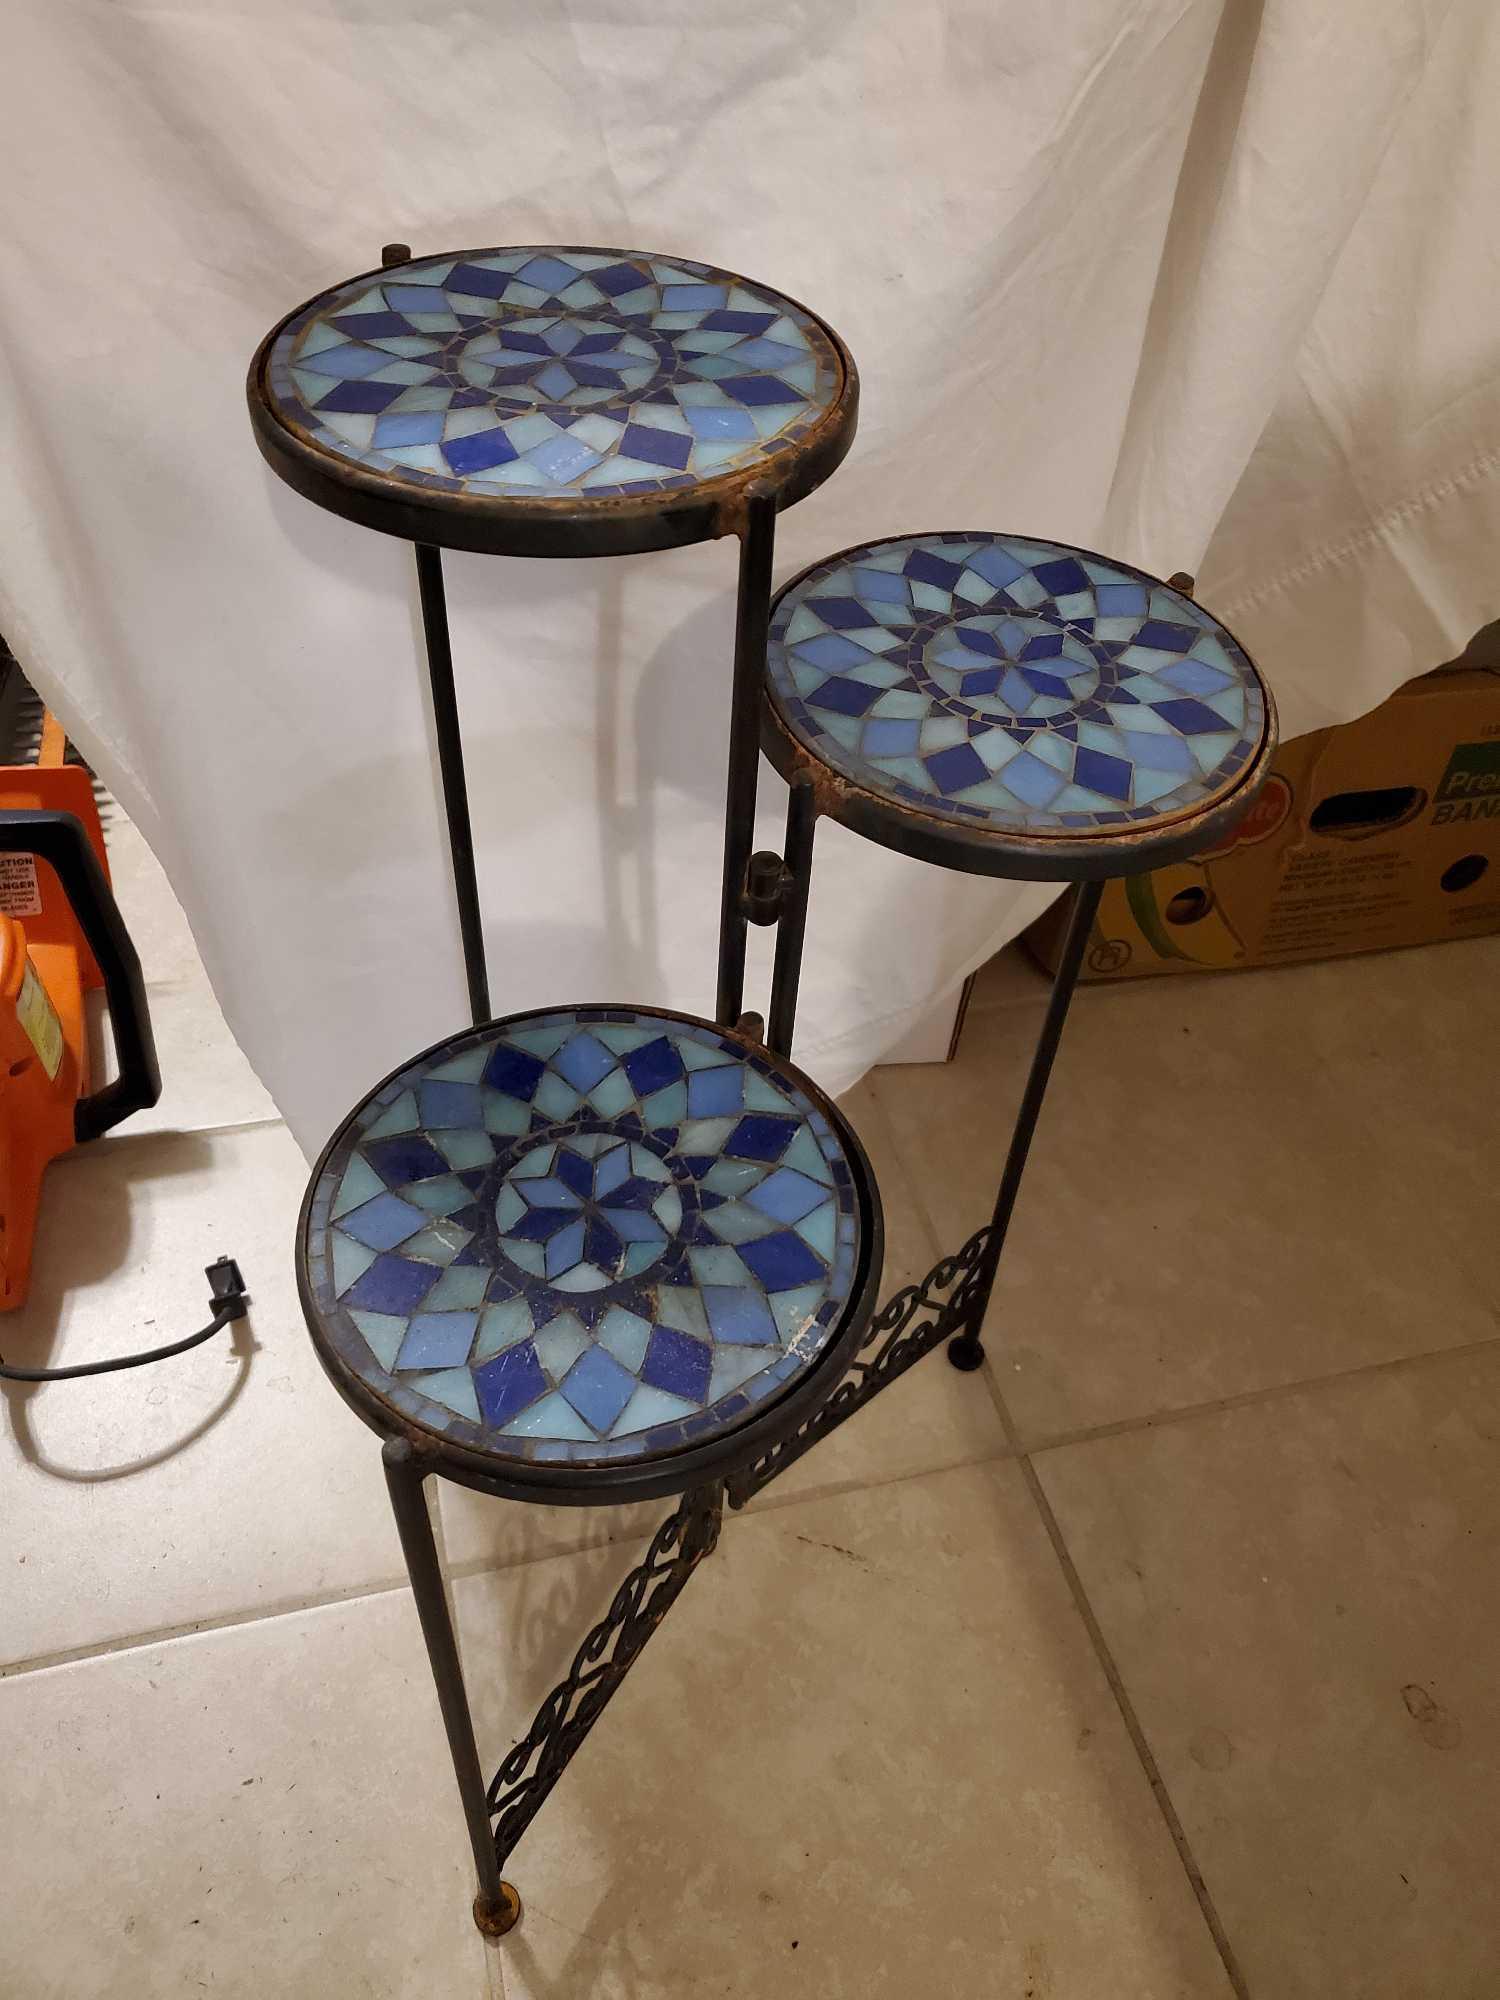 Mosaic STAINED GLASS topped 3 tier plant stand, folding